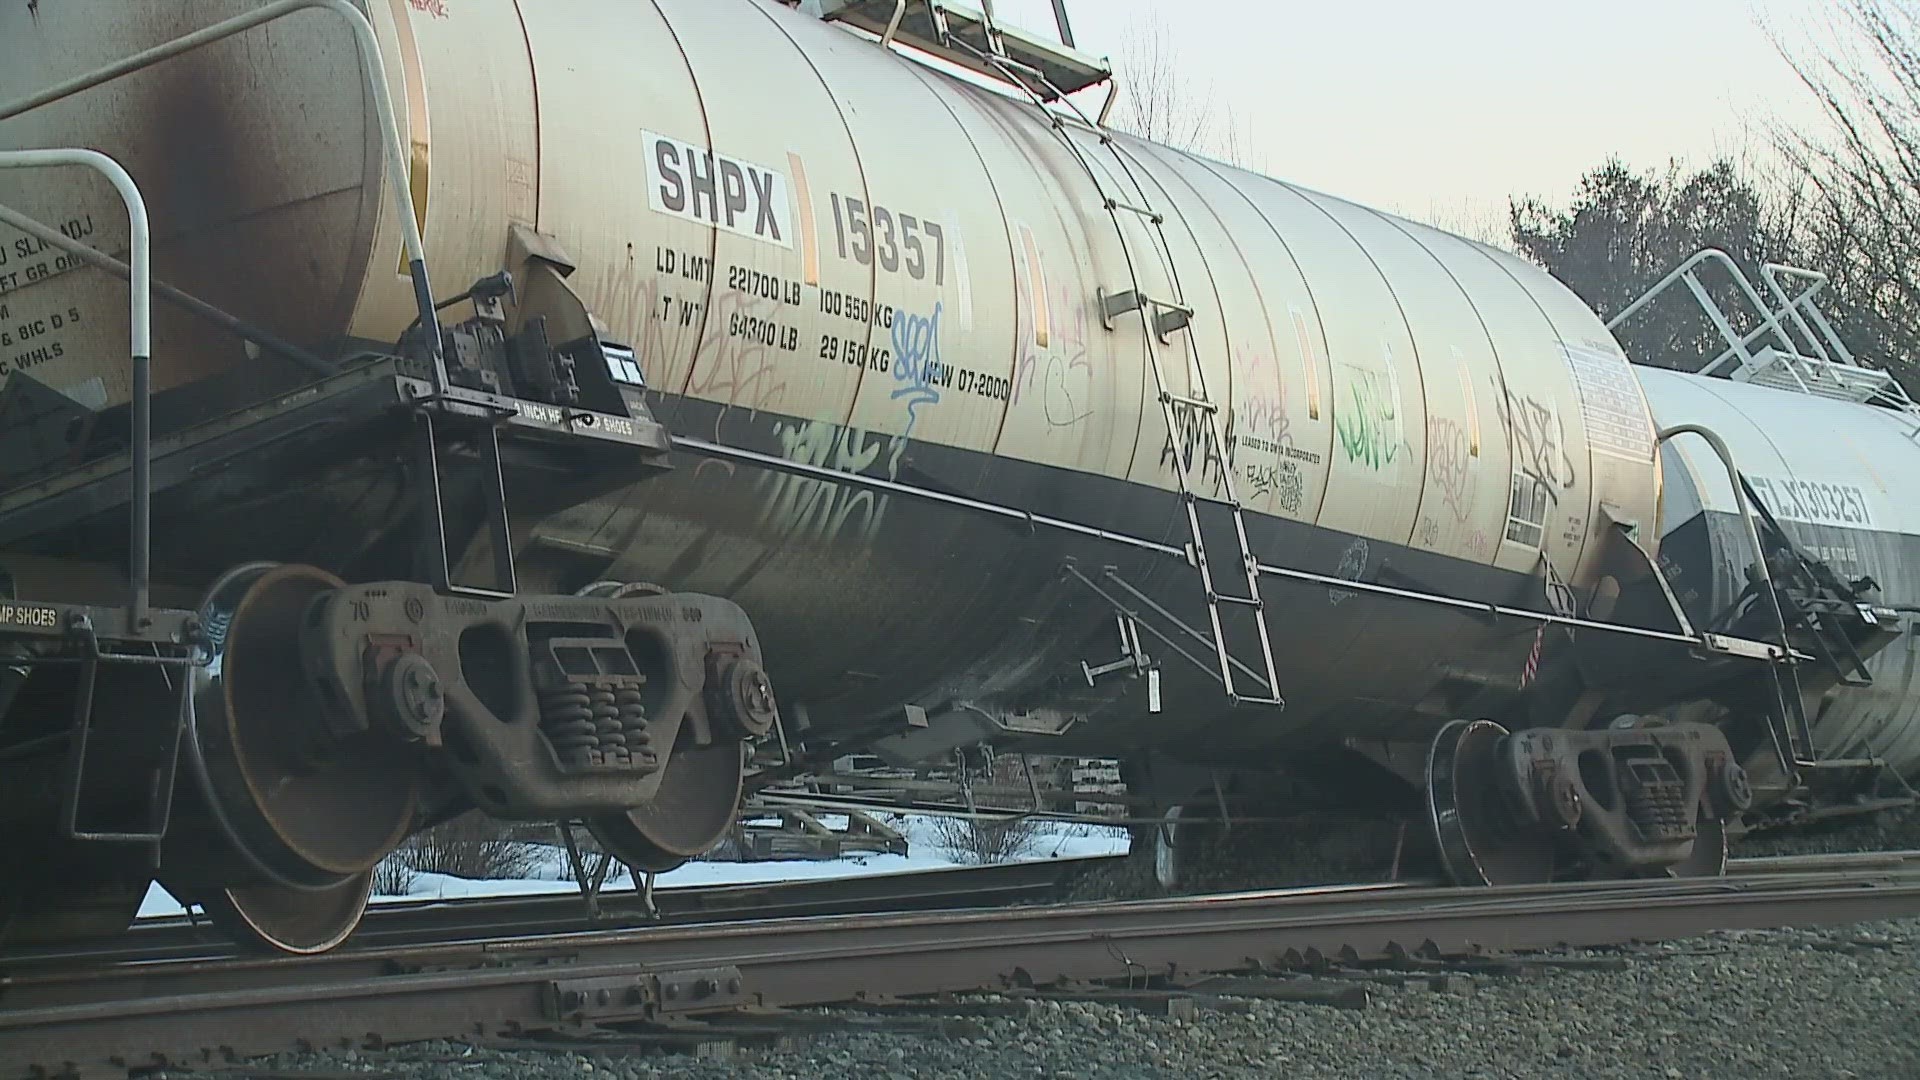 Train company CSX said no injuries were reported and no product was released.